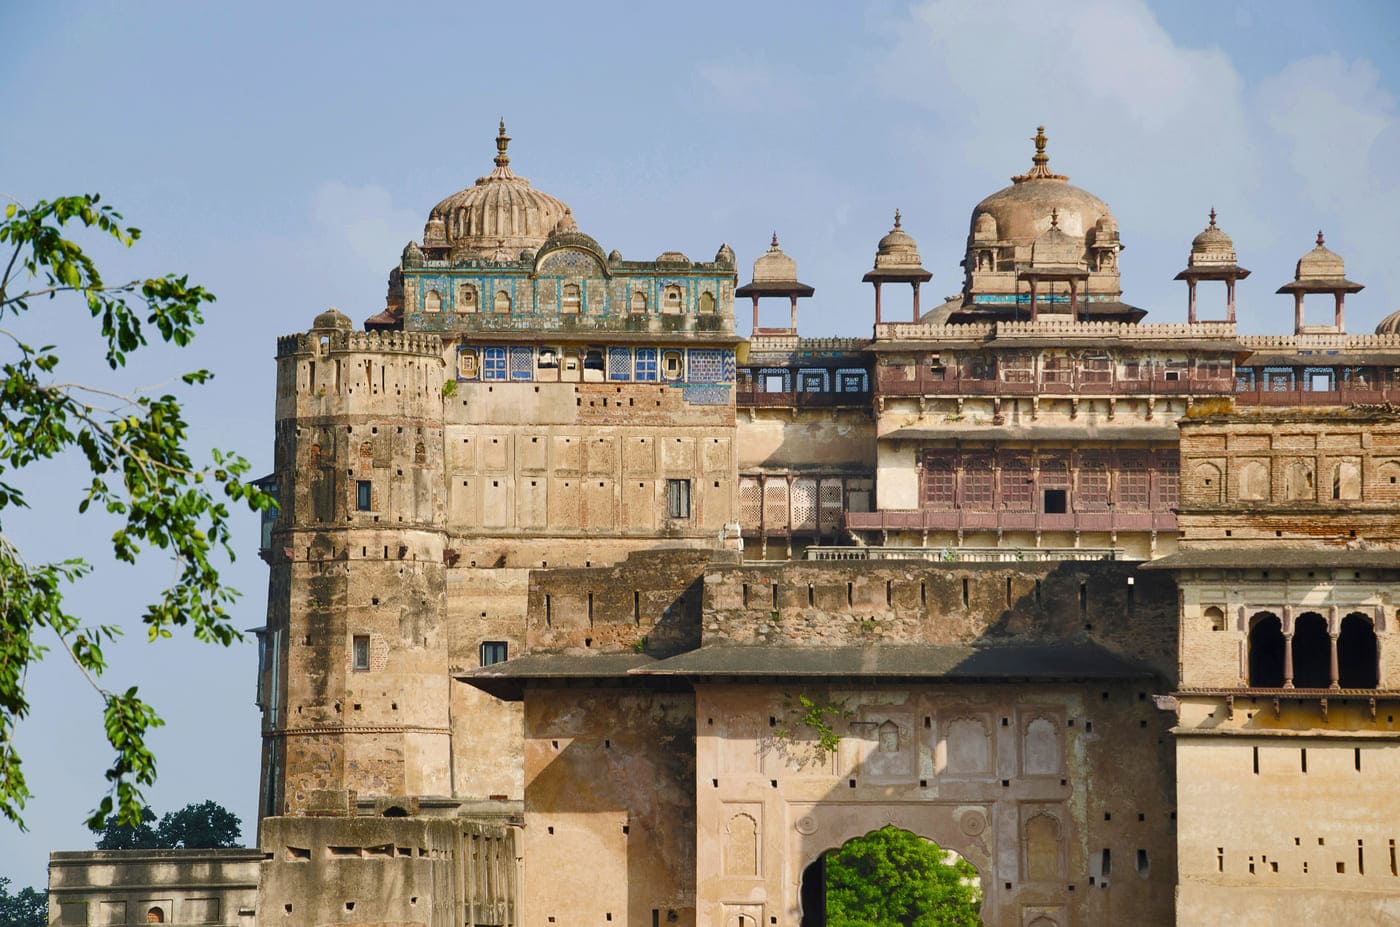 Exterior view of the Sheesh Mahal Heritage Hotel, with the domes of Jehangir Mahal visible in the background, situated in Orchha 